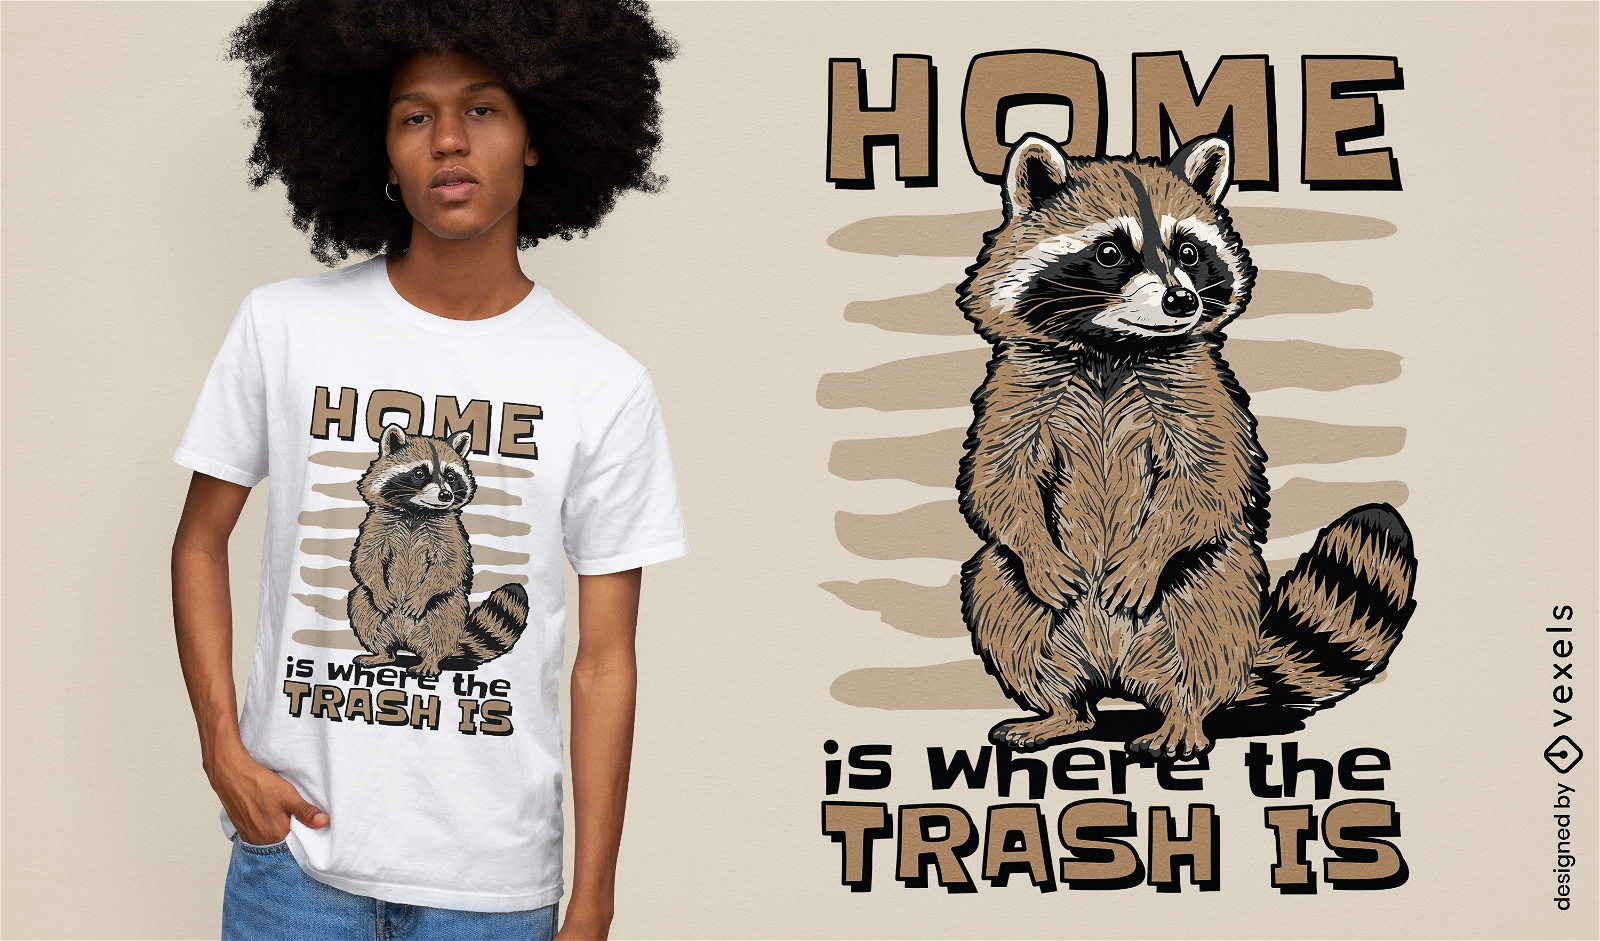 Home is where the trash is t-shirt design